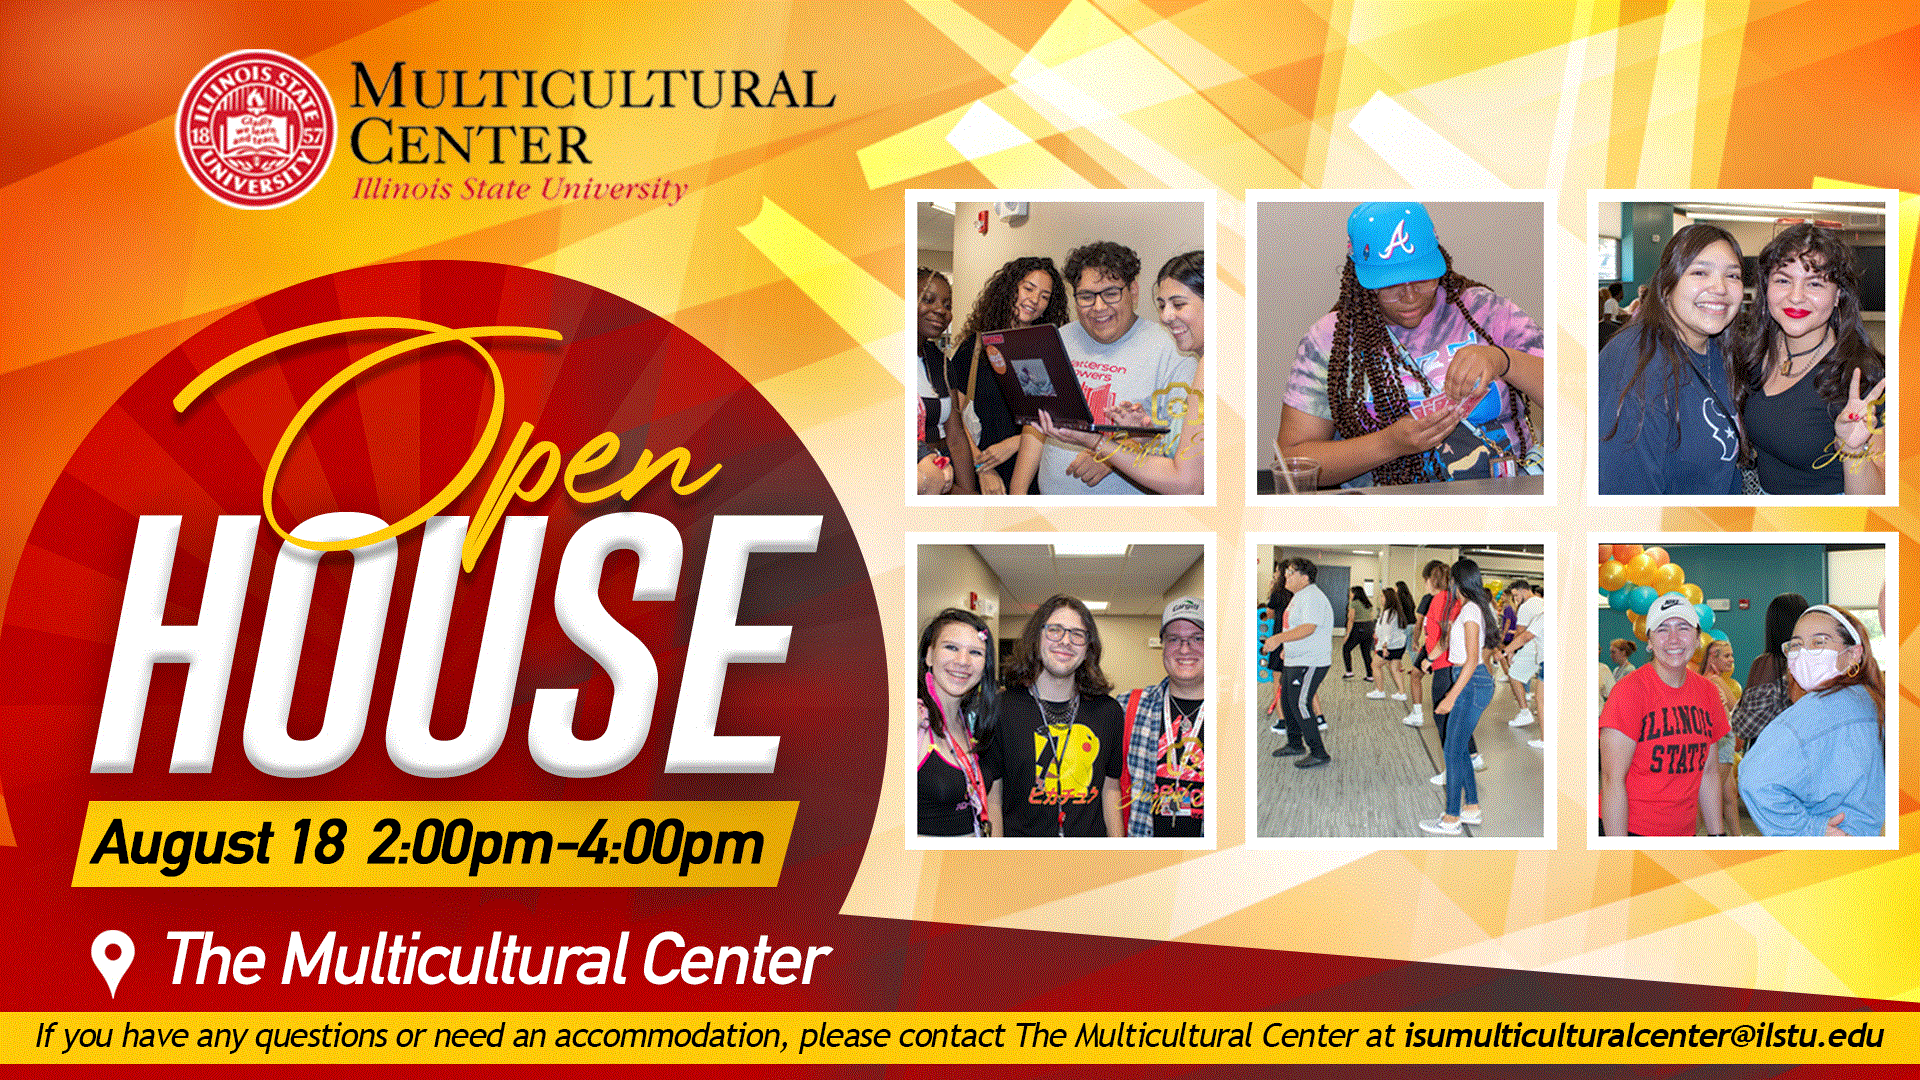 Multicultural Center Open House - Images of Students - Event August 18 2-4pm 